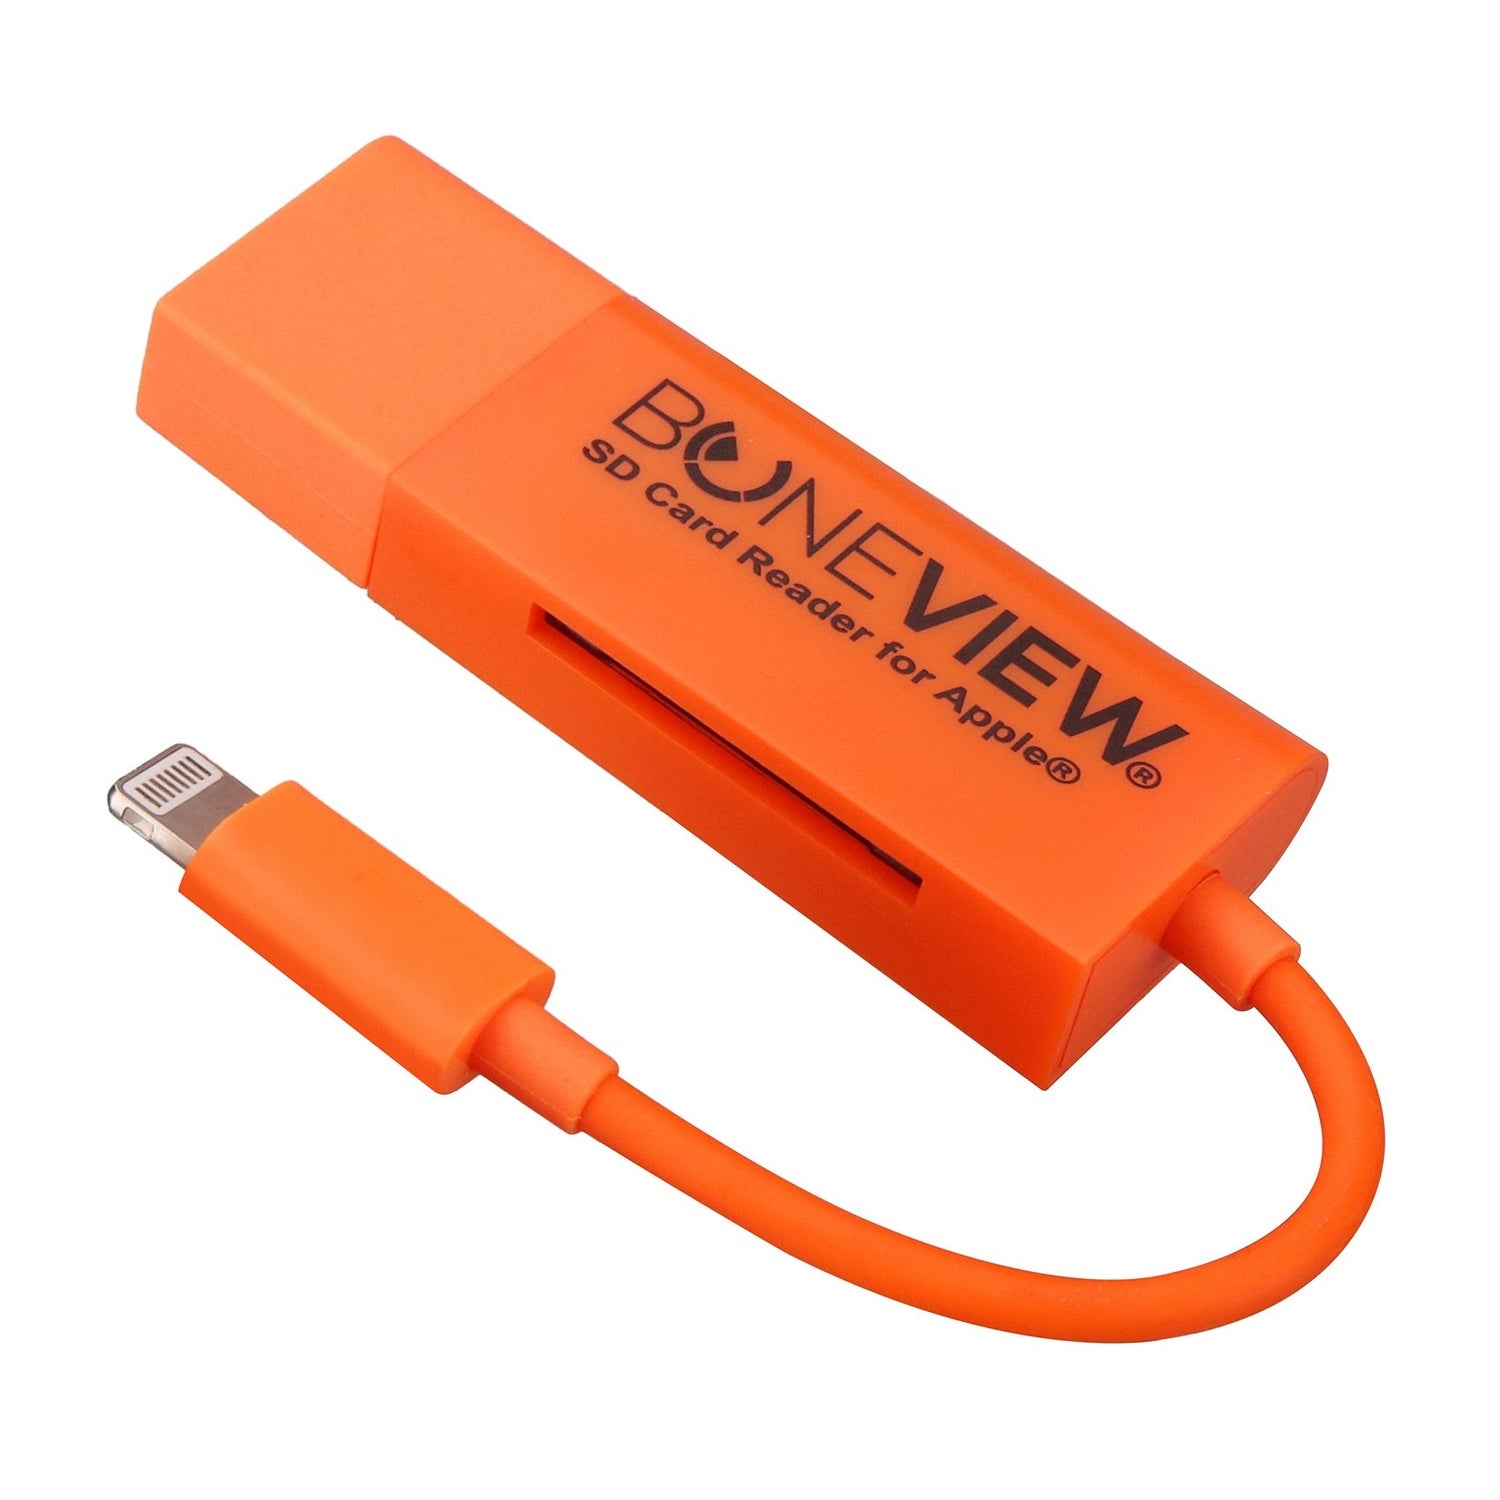 boneview sd card reader for apple iphone full SD slot side view